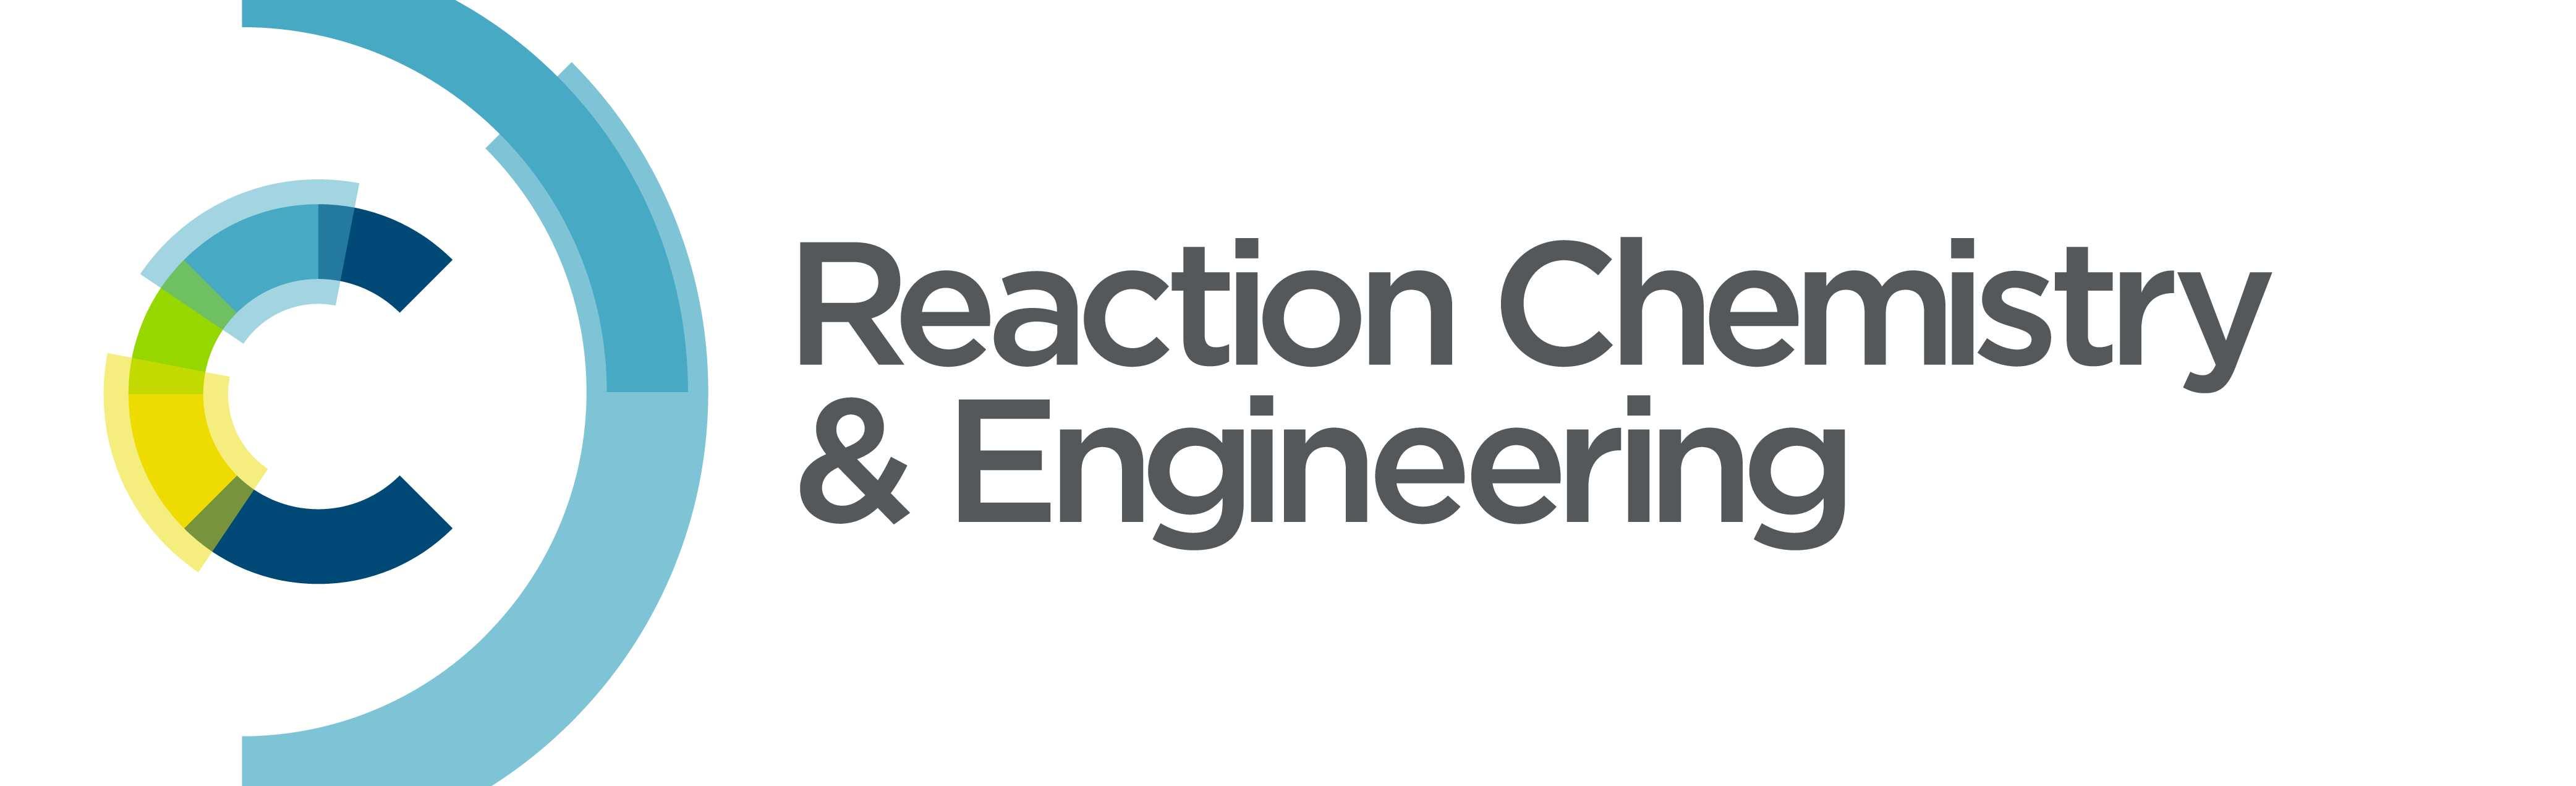 Reaction Chemistry and Engineering Logo